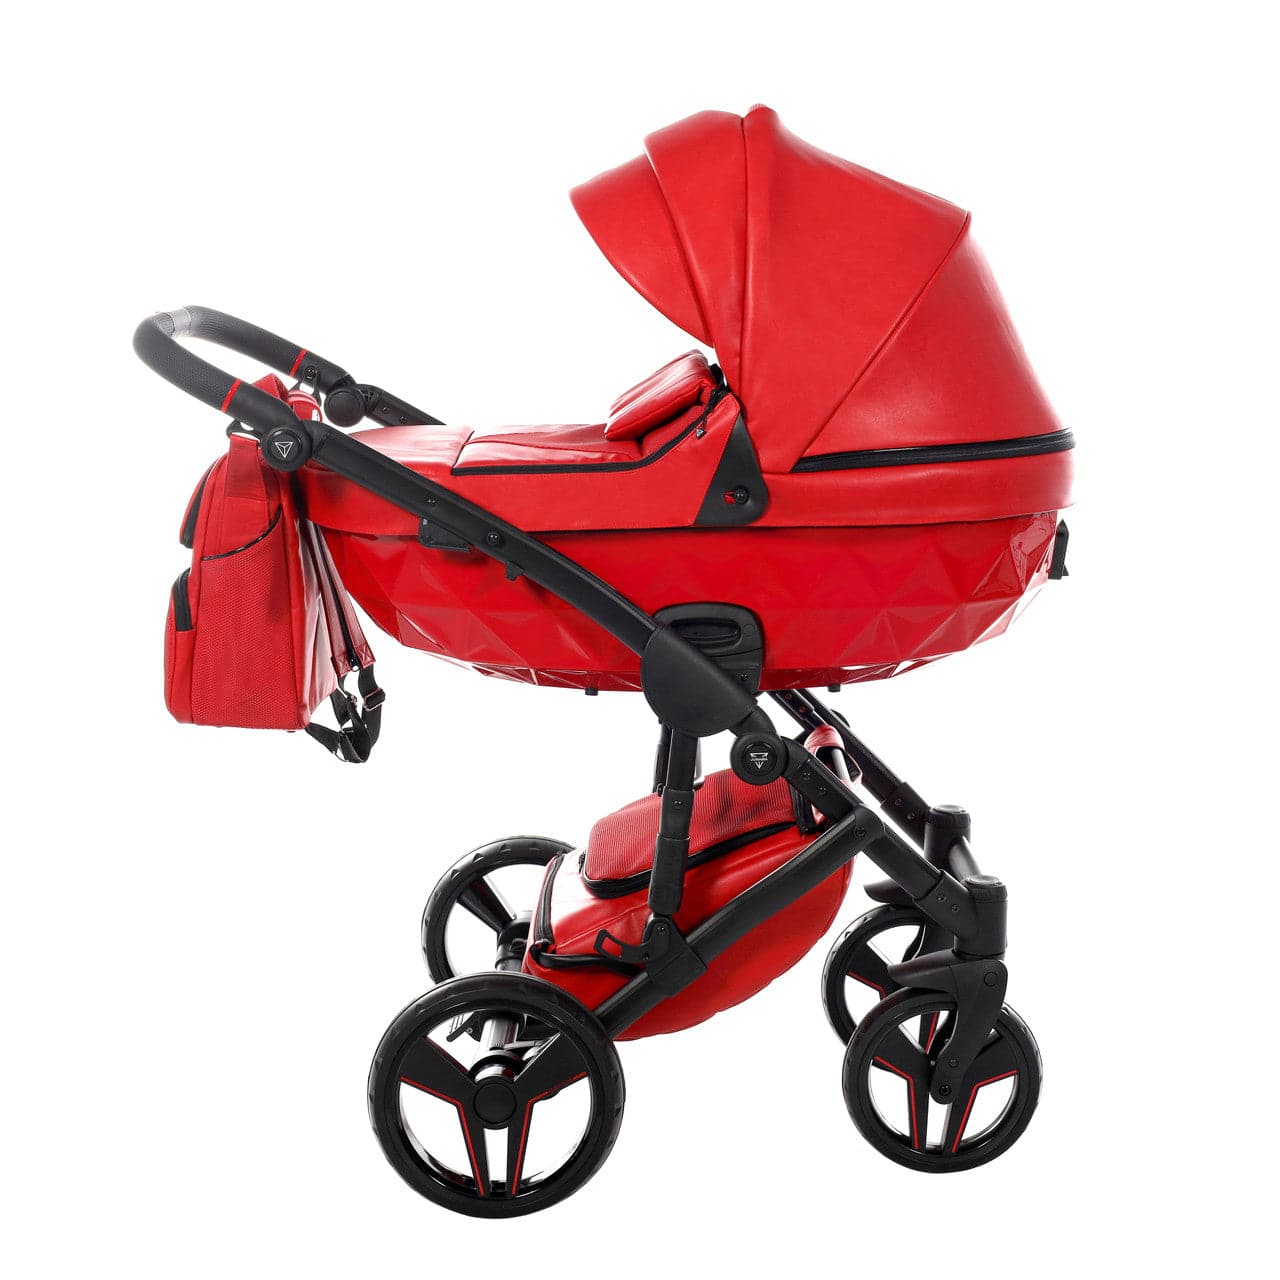 Junama S-Class 2 In 1 Pram - Red - For Your Little One